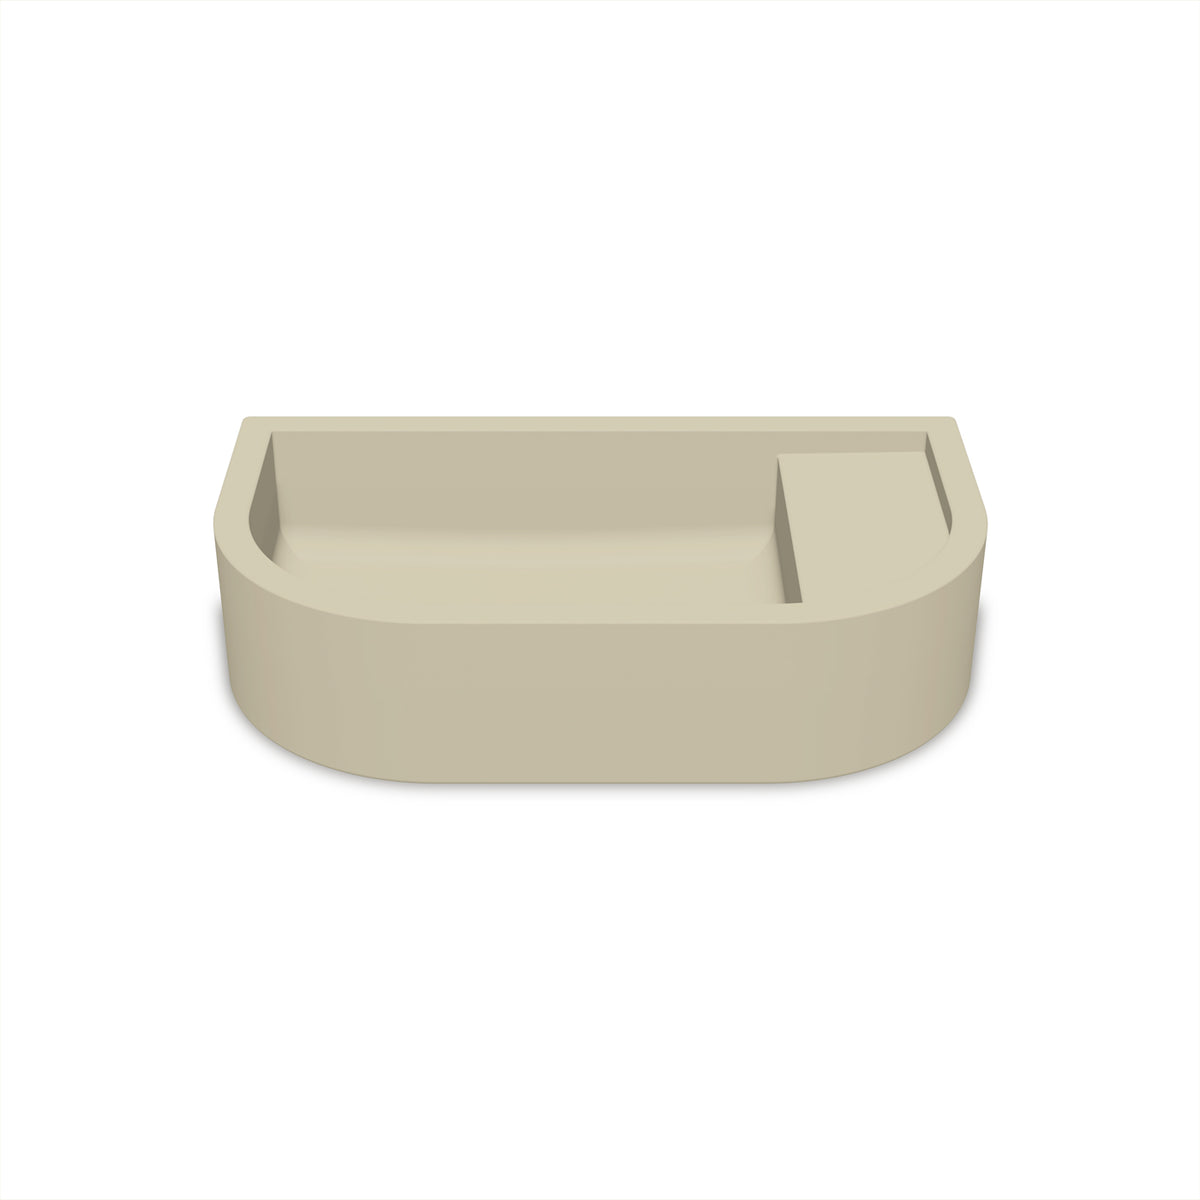 Loop 02 Basin - Overflow - Surface Mount (Sand,No Tap Hole,Chrome)